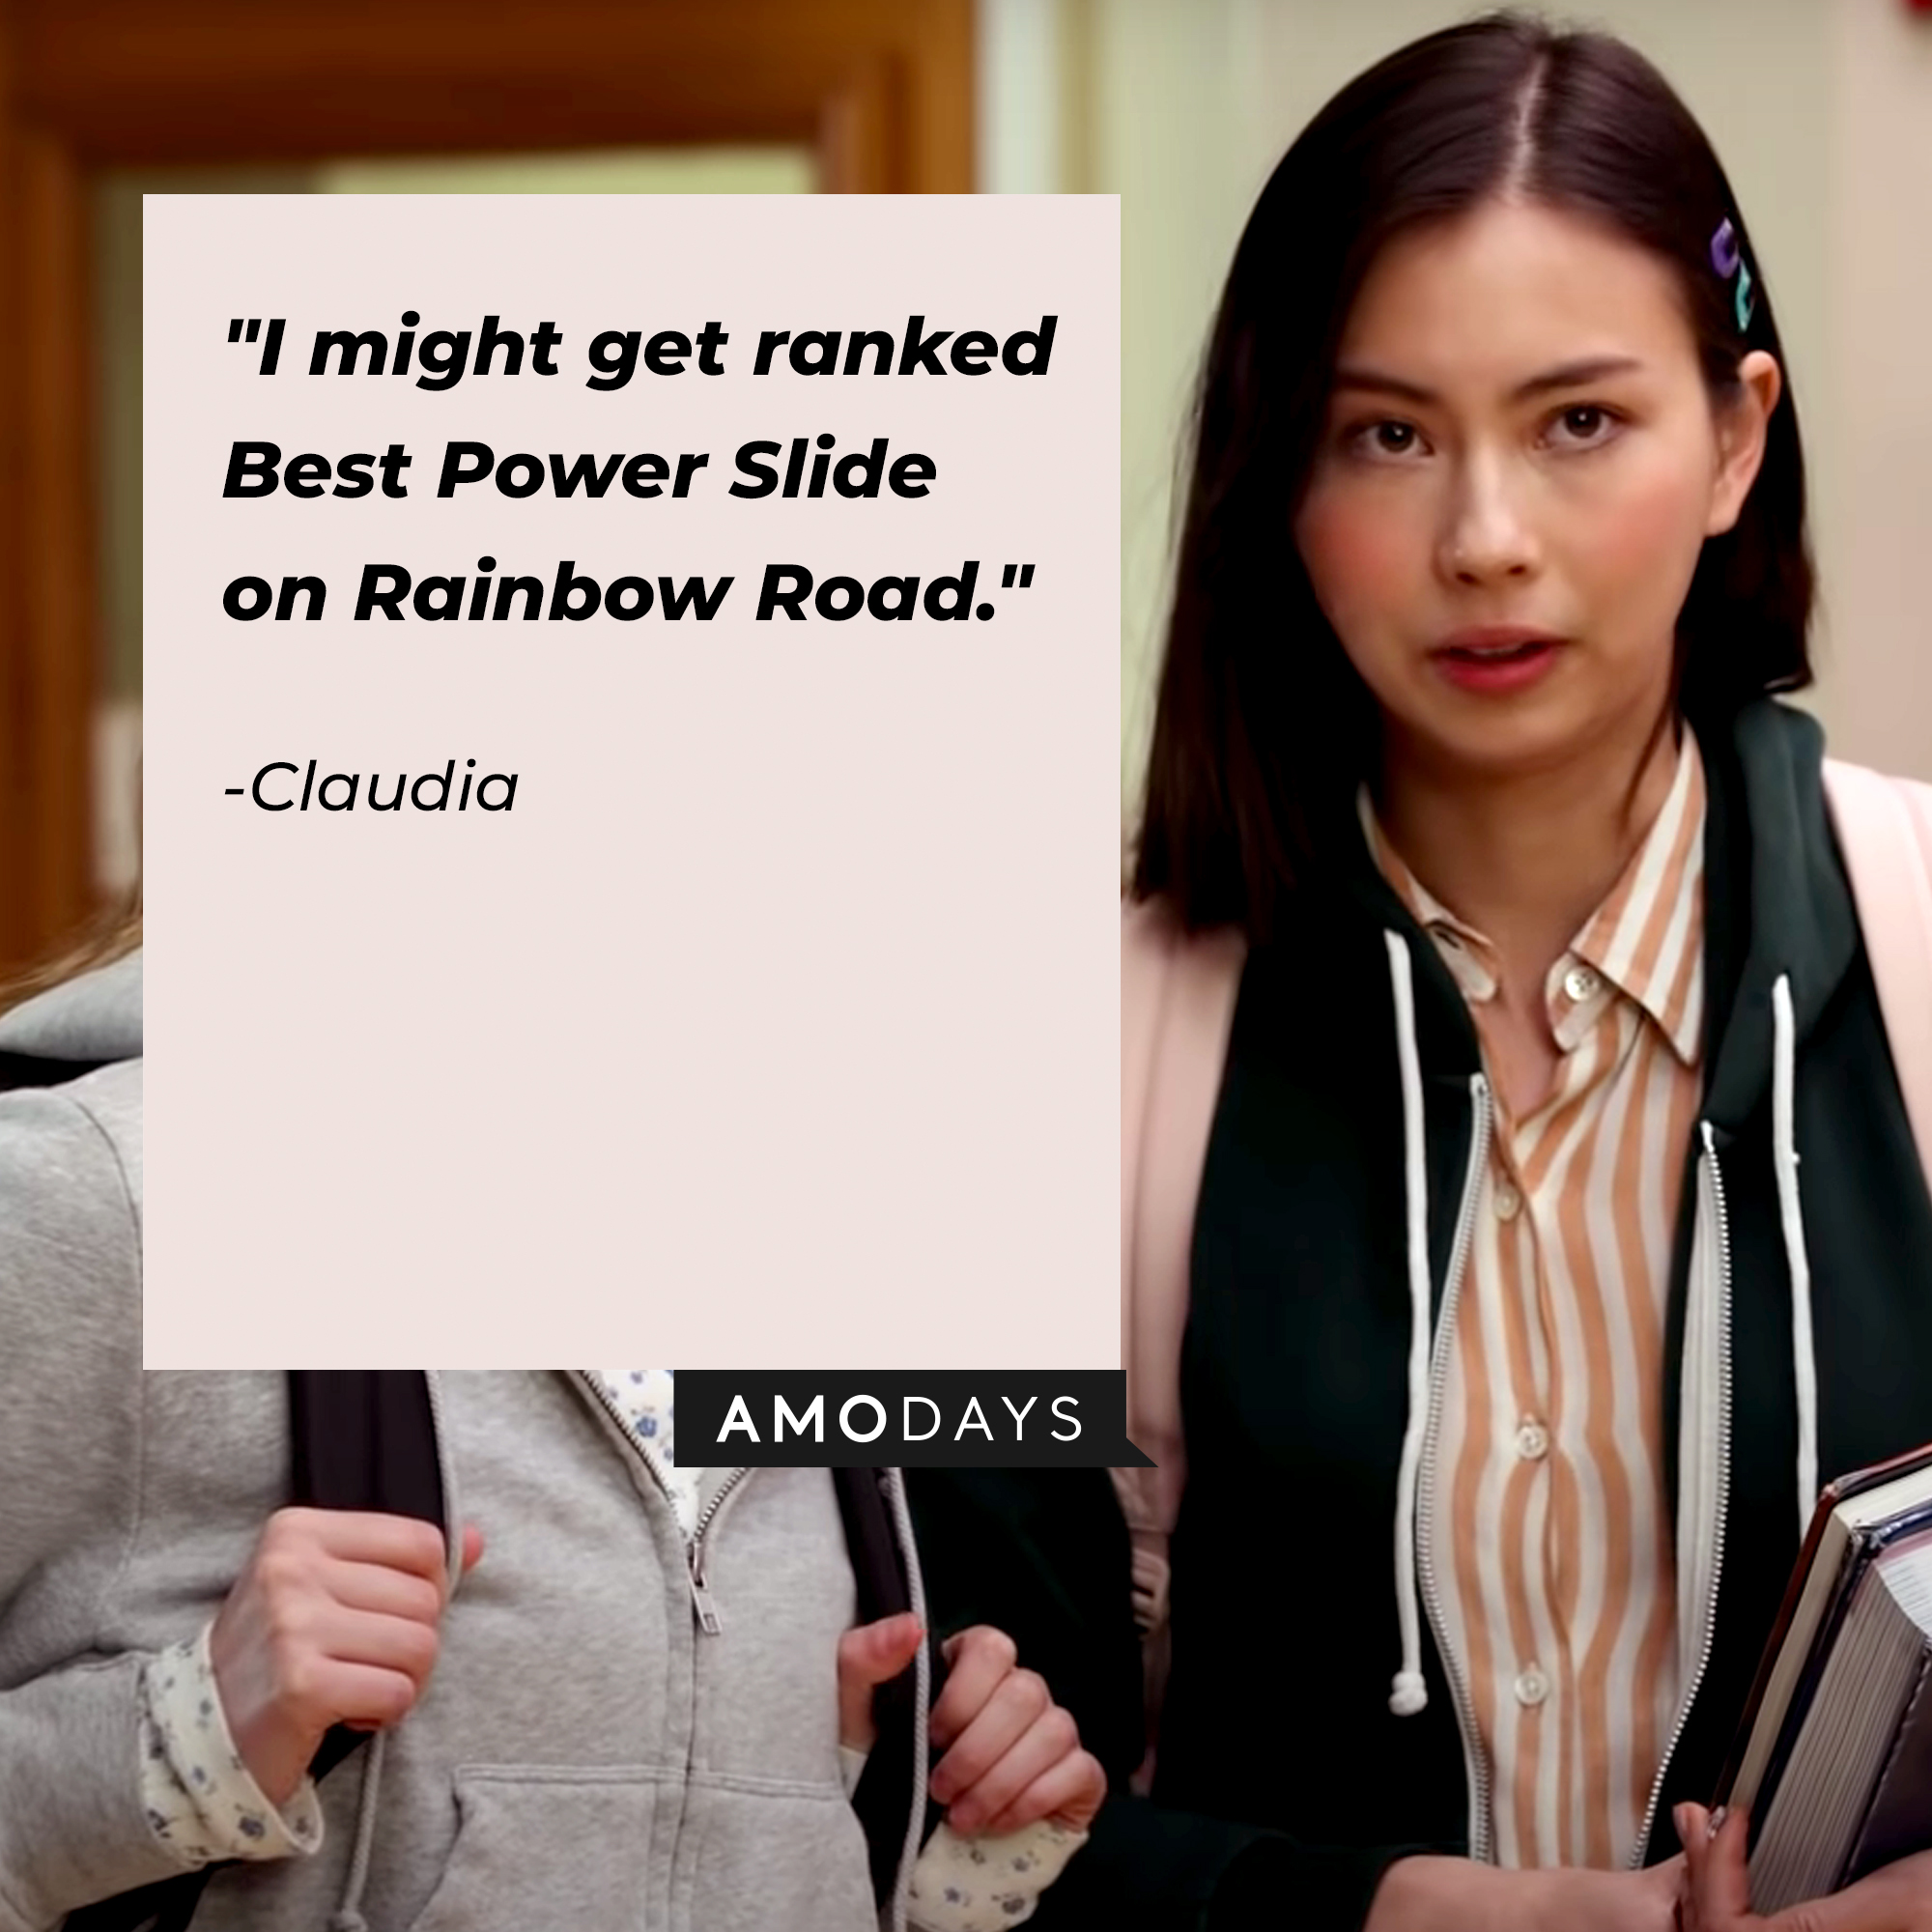 Claudia’s quote: "I might get ranked Best Power Slide on Rainbow Road." | Image: Youtube.com/Netflix